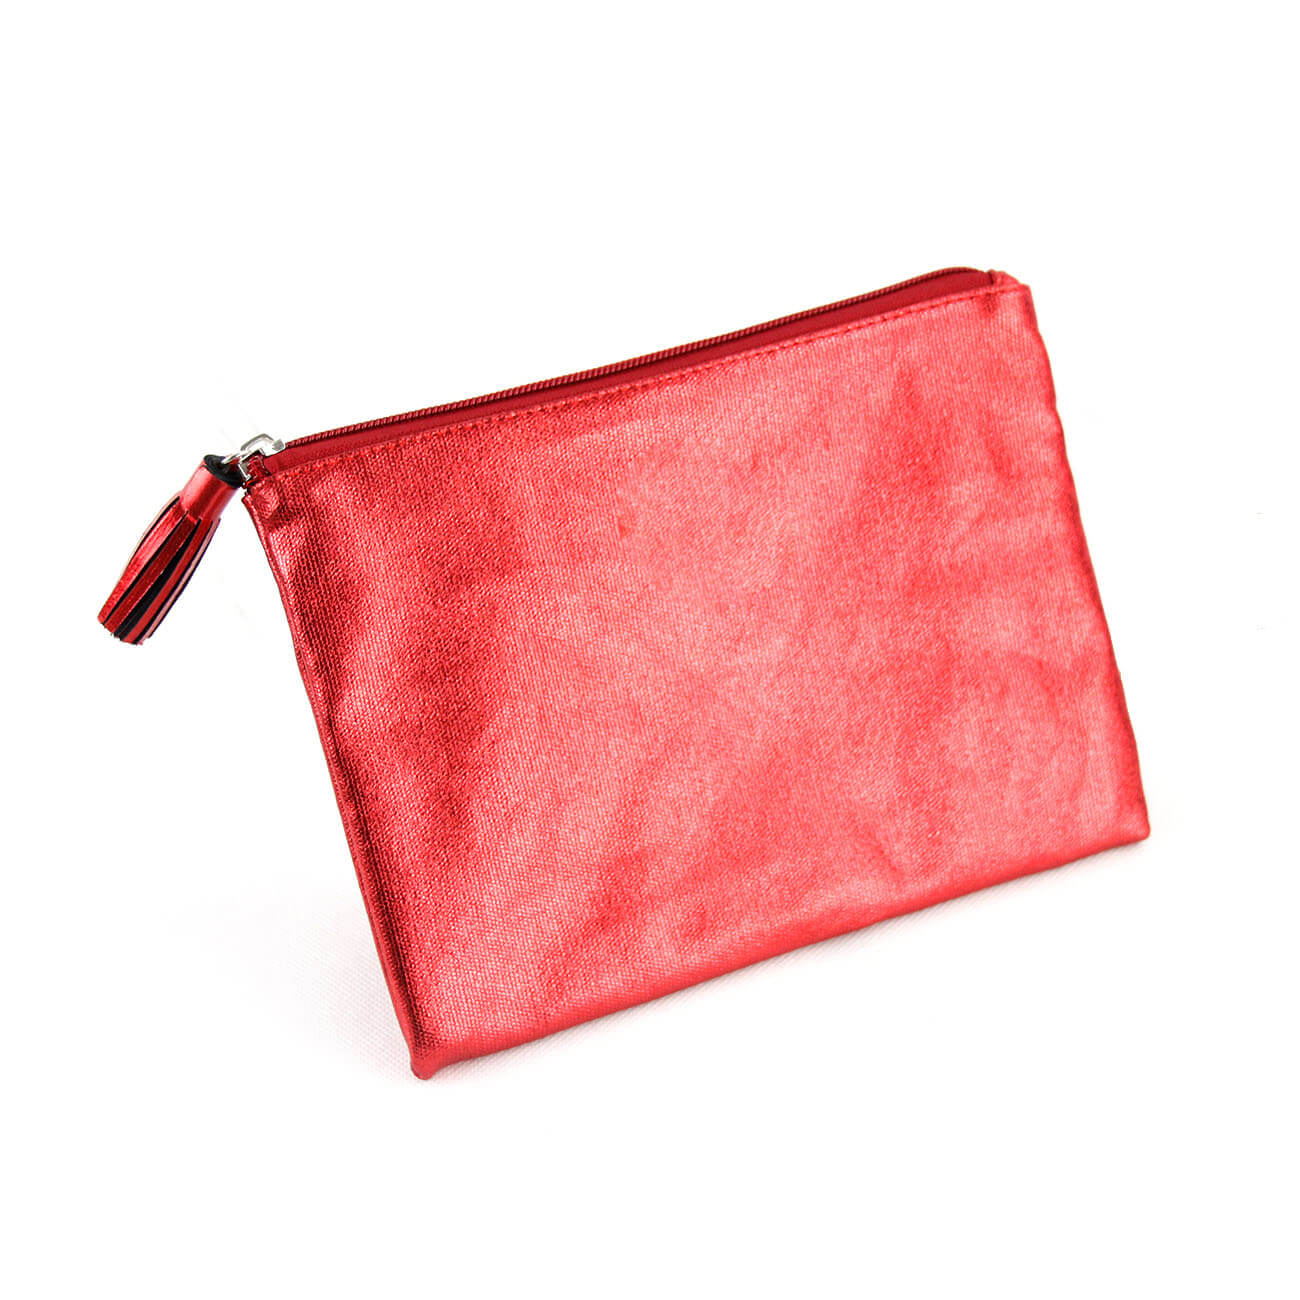 Laminated Canvas Cosmetic Pouch